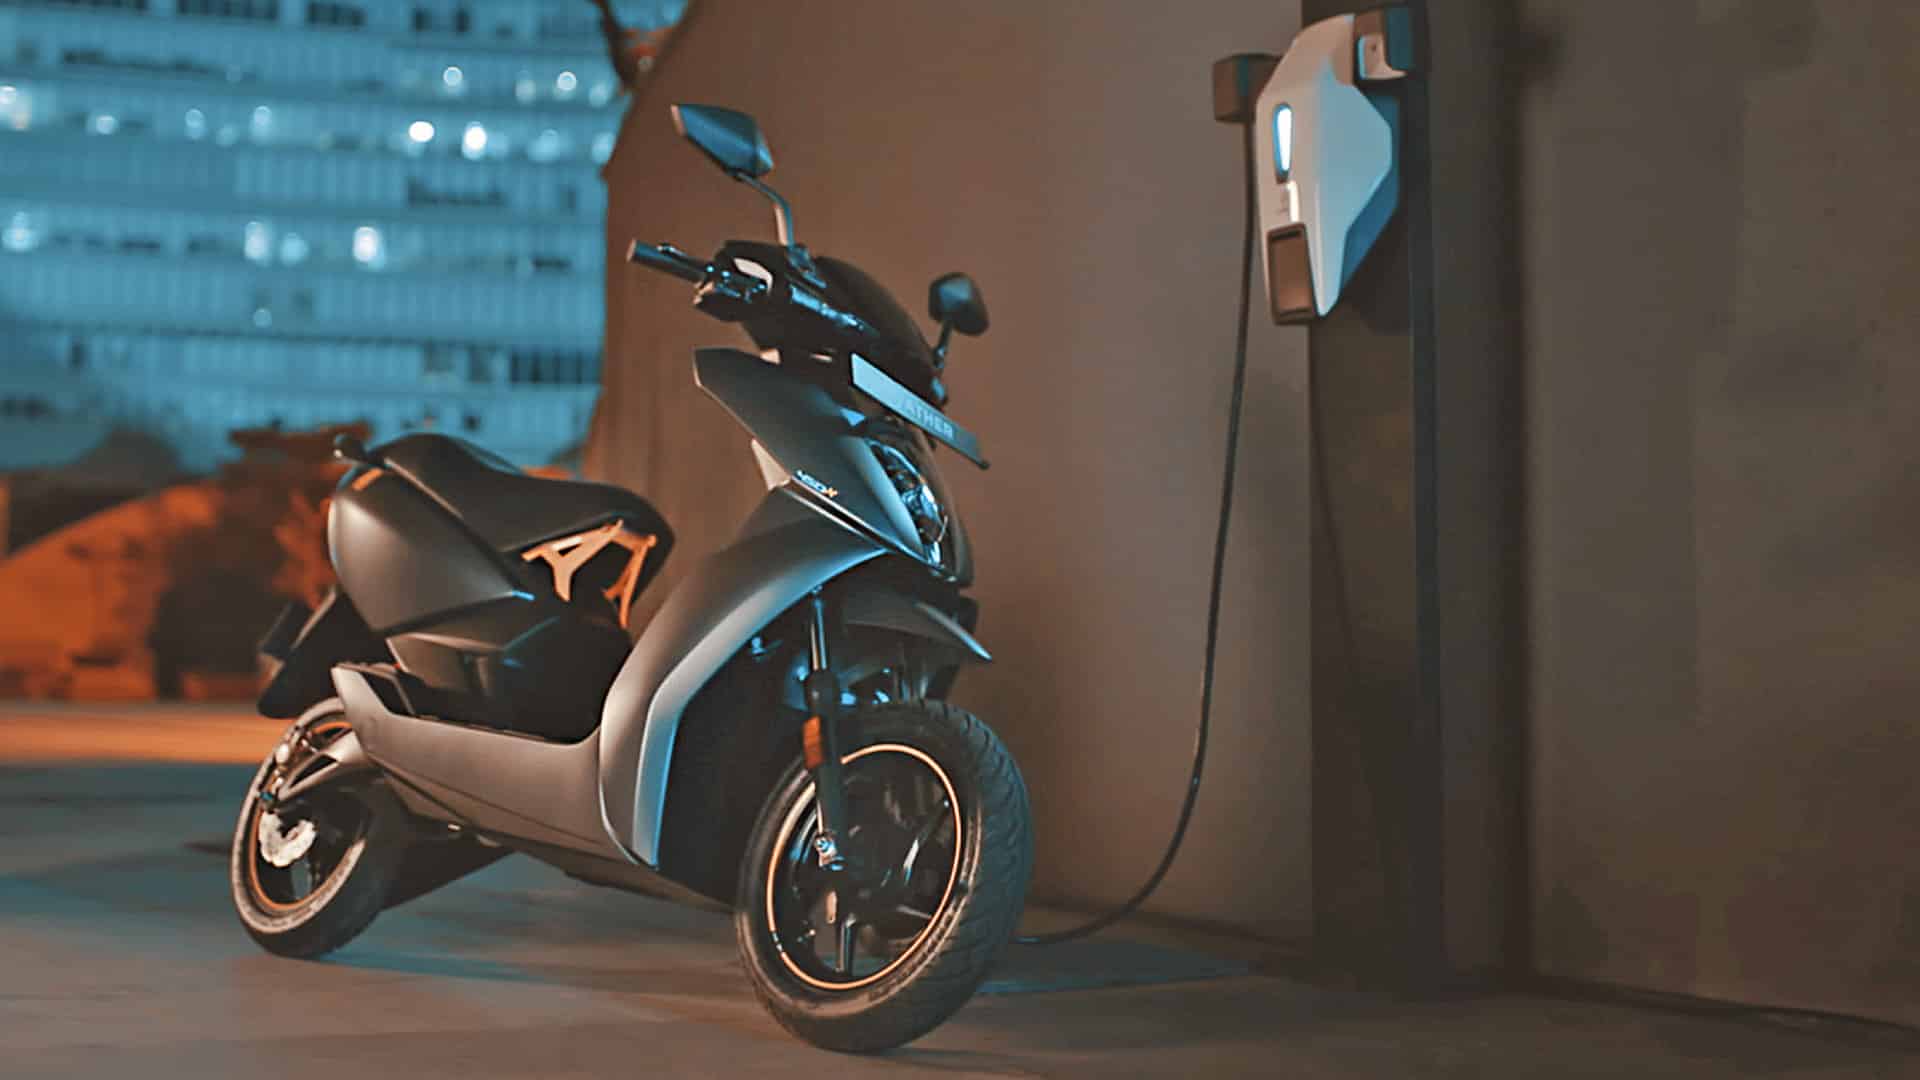 Electric 2wheeler sales in India rise over twoandhalf fold to 8